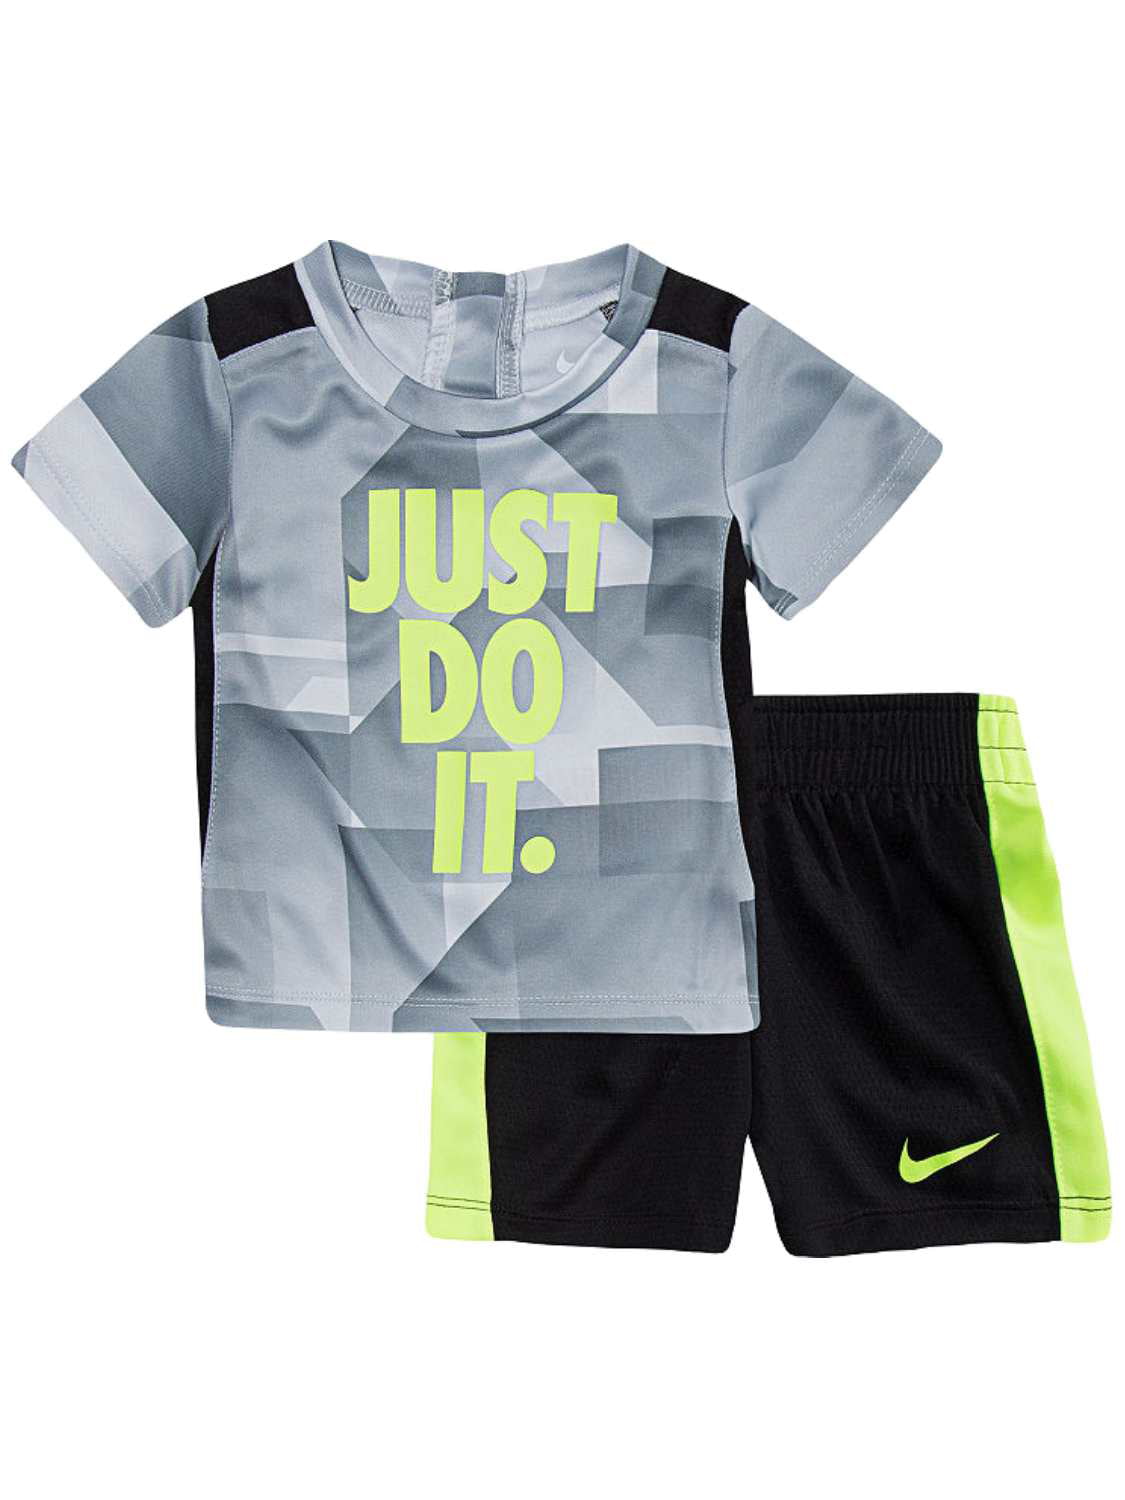 Nike Dri-fit Toddler Boys Outfit Gray 